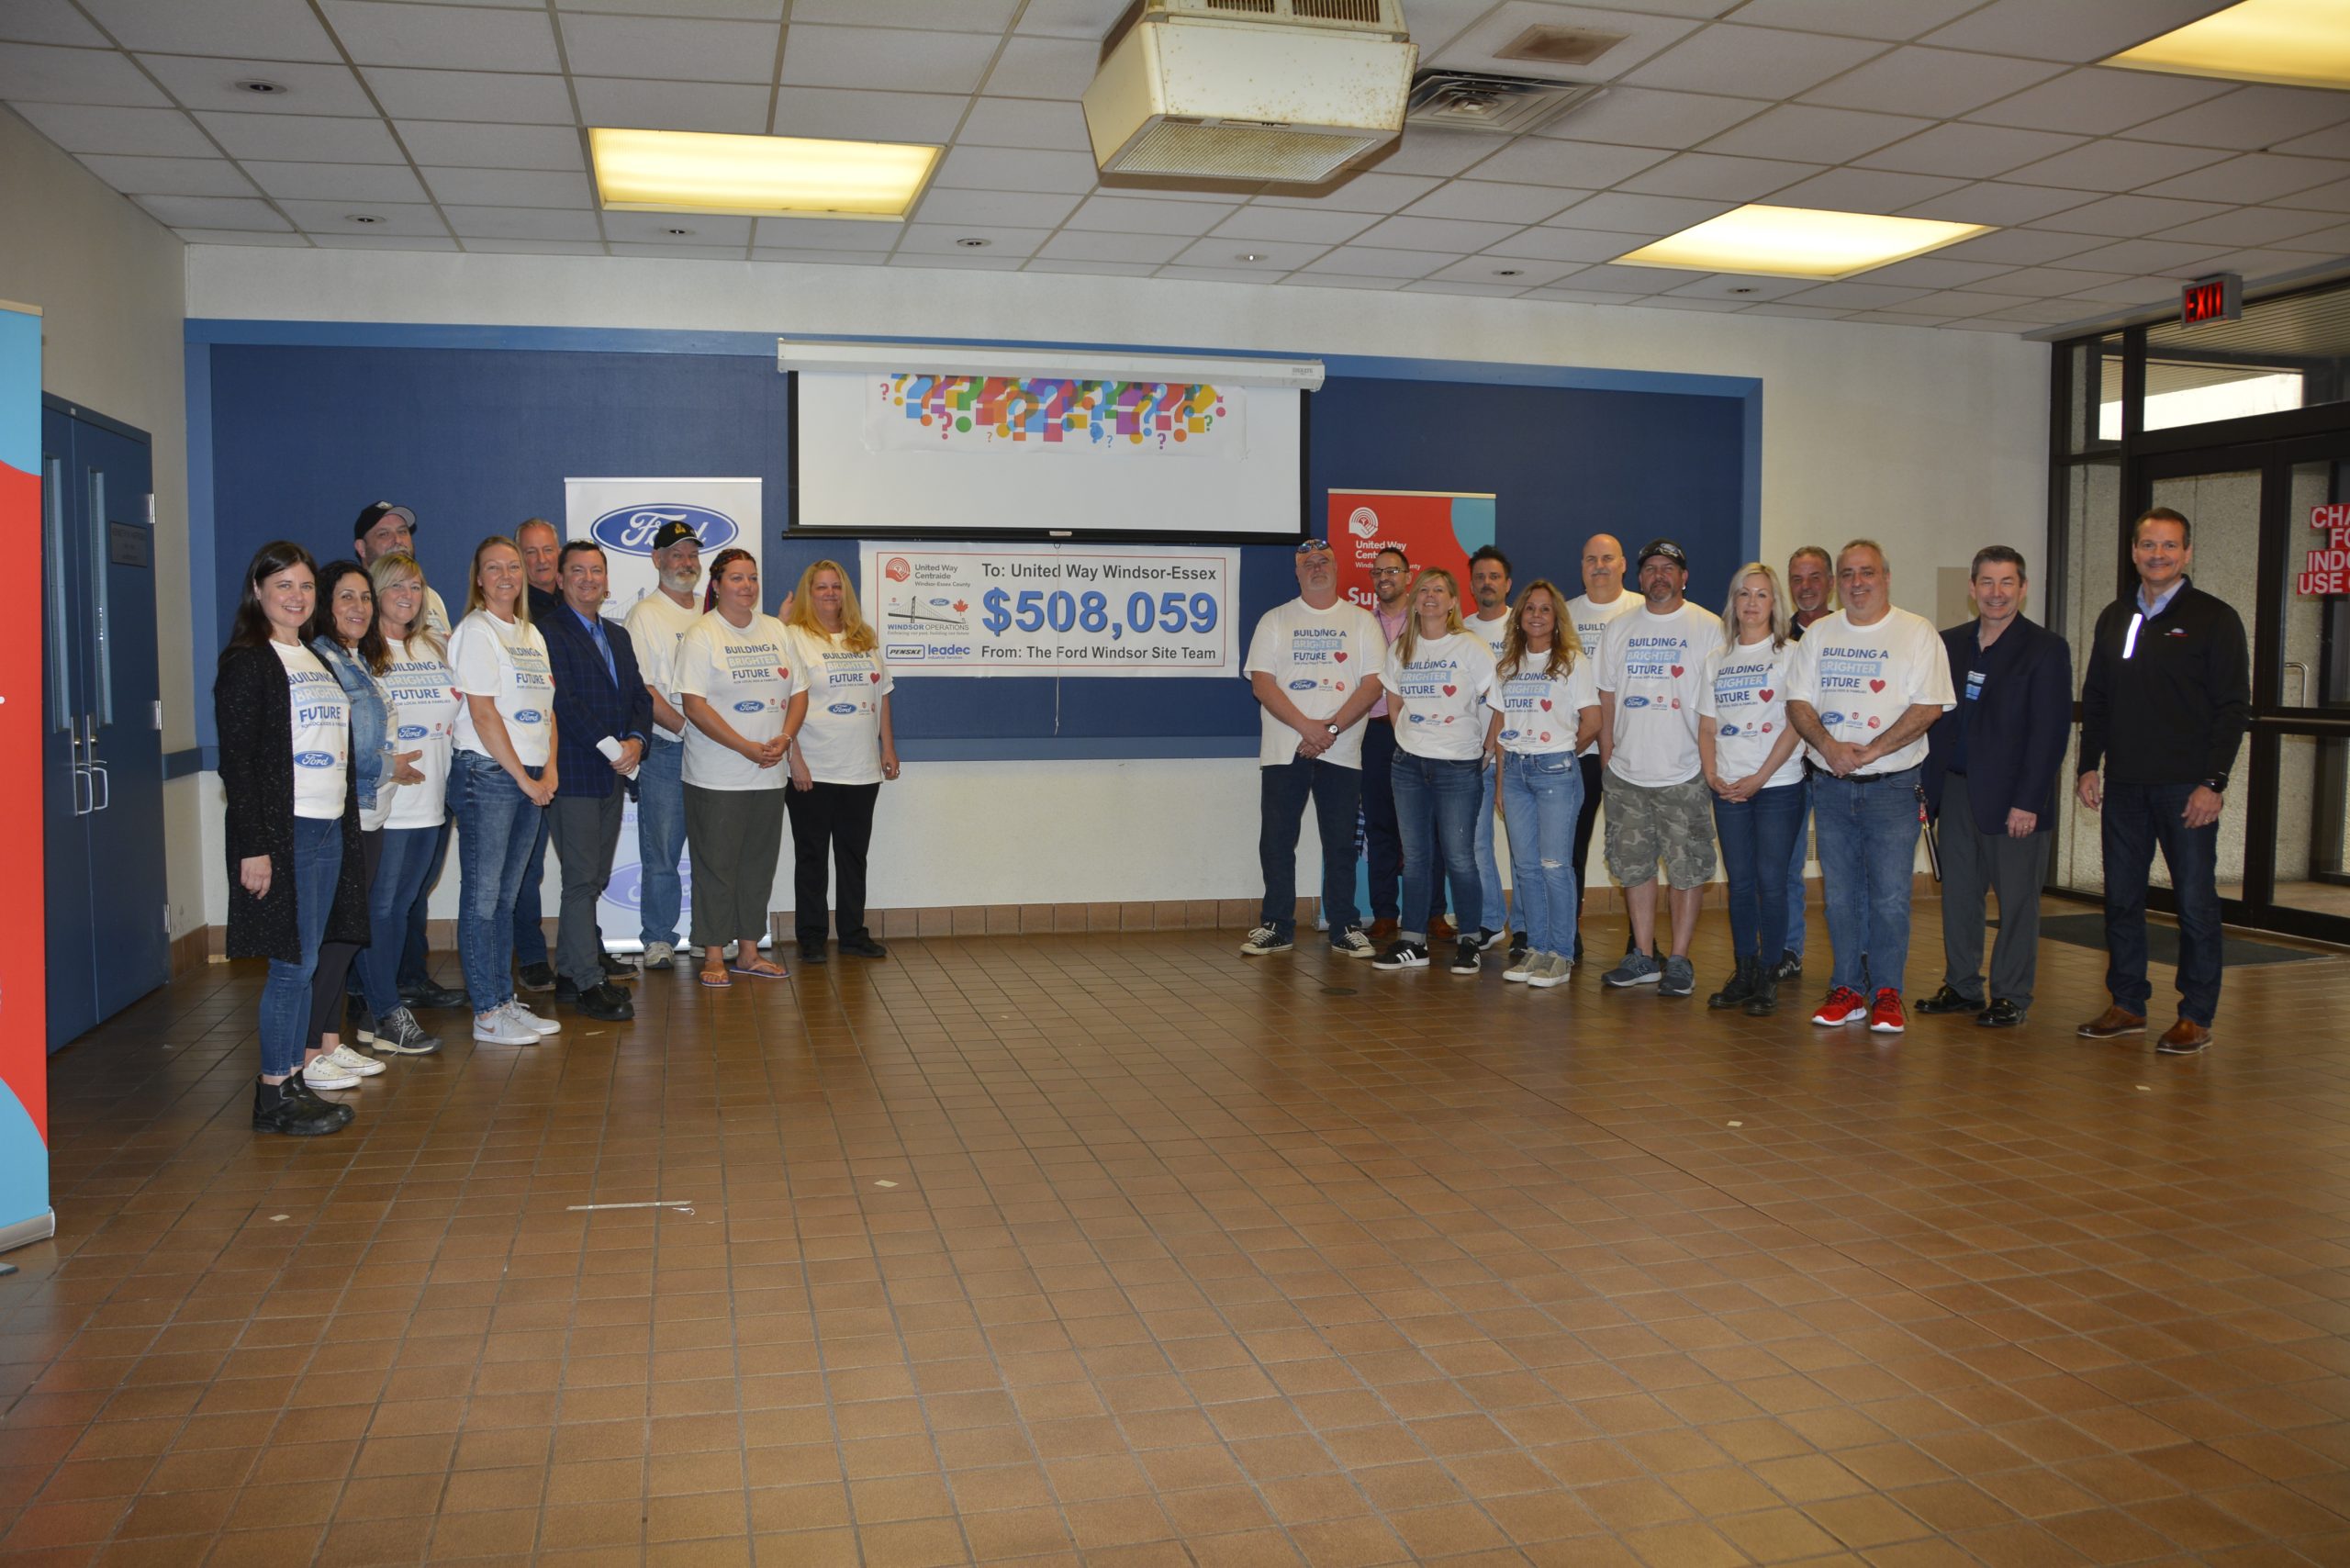 Ford Windsor Operations raises $508,059 for Building a Brighter Future campaign in support of United Way Post Featured Image